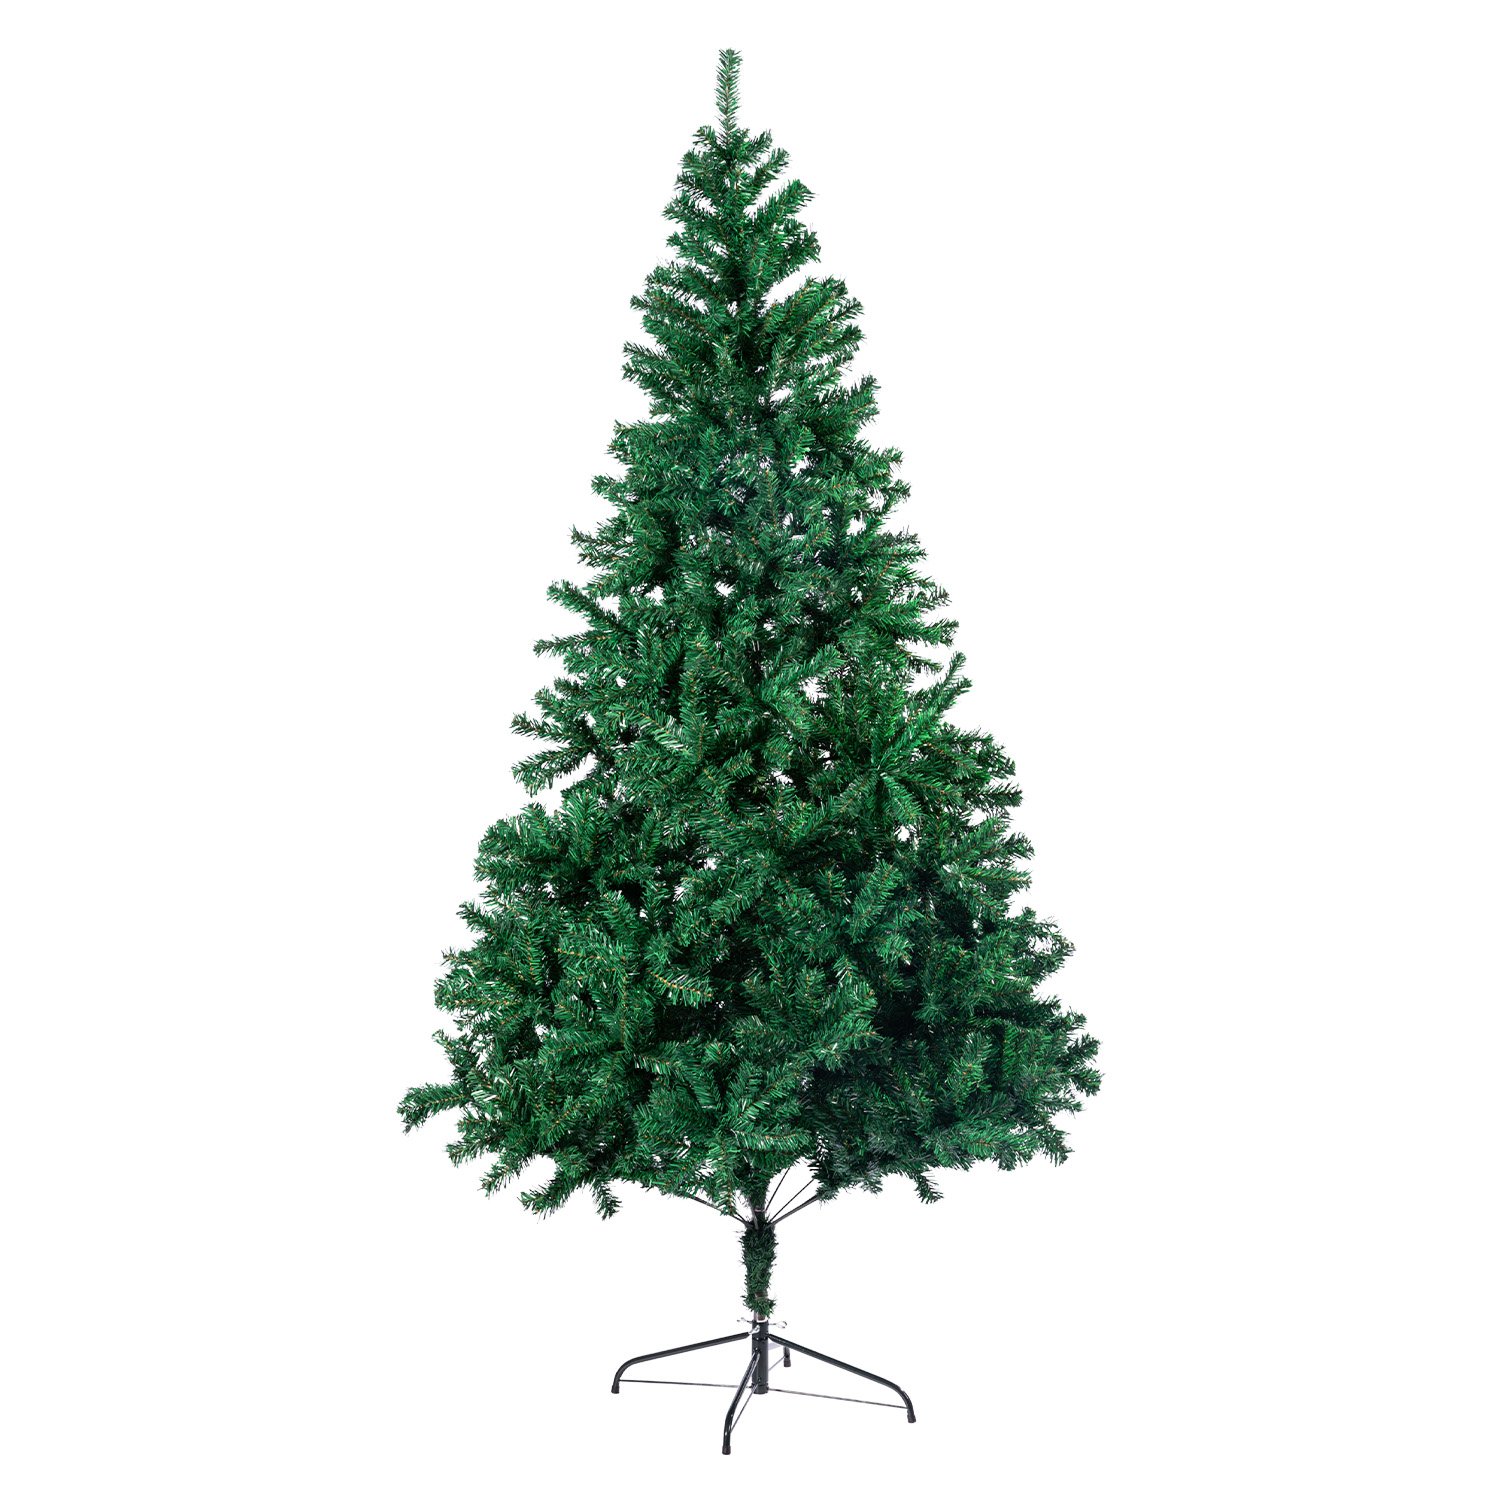 Christabelle Green Artificial Christmas Tree 1.5m - 550 Tips 1